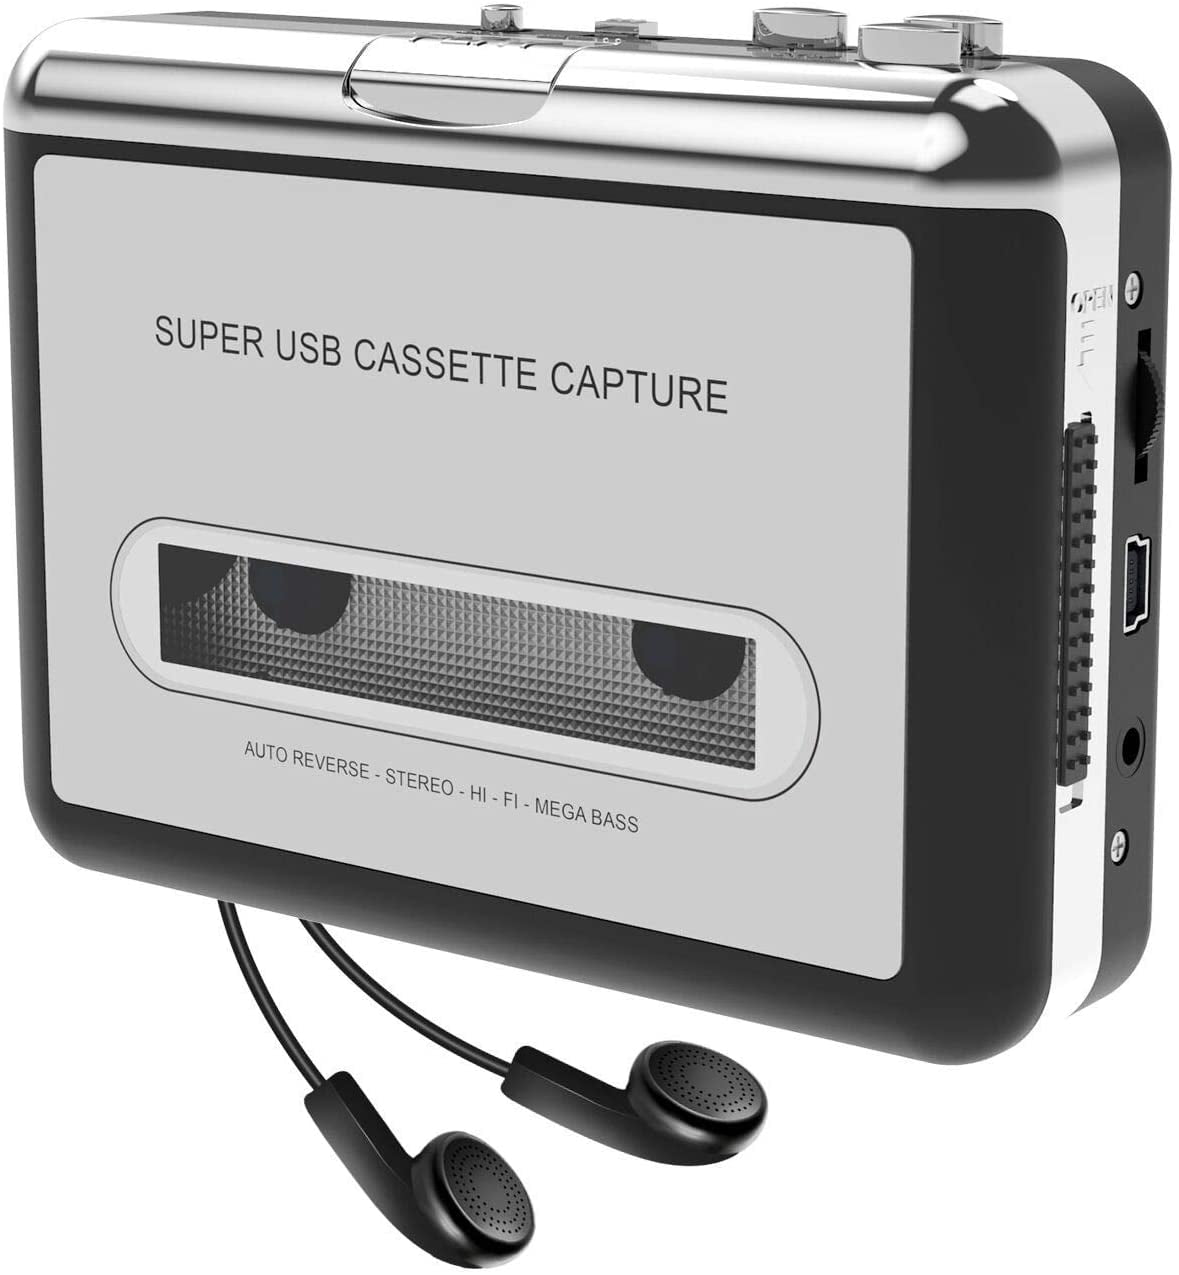 USB Cassette Player Converter The Mix Tapes and Cassette to Playback on for PC MP3 CD Switcher Capture Audio Music Player Portable with Headphones via USB 2.0 or Battery 